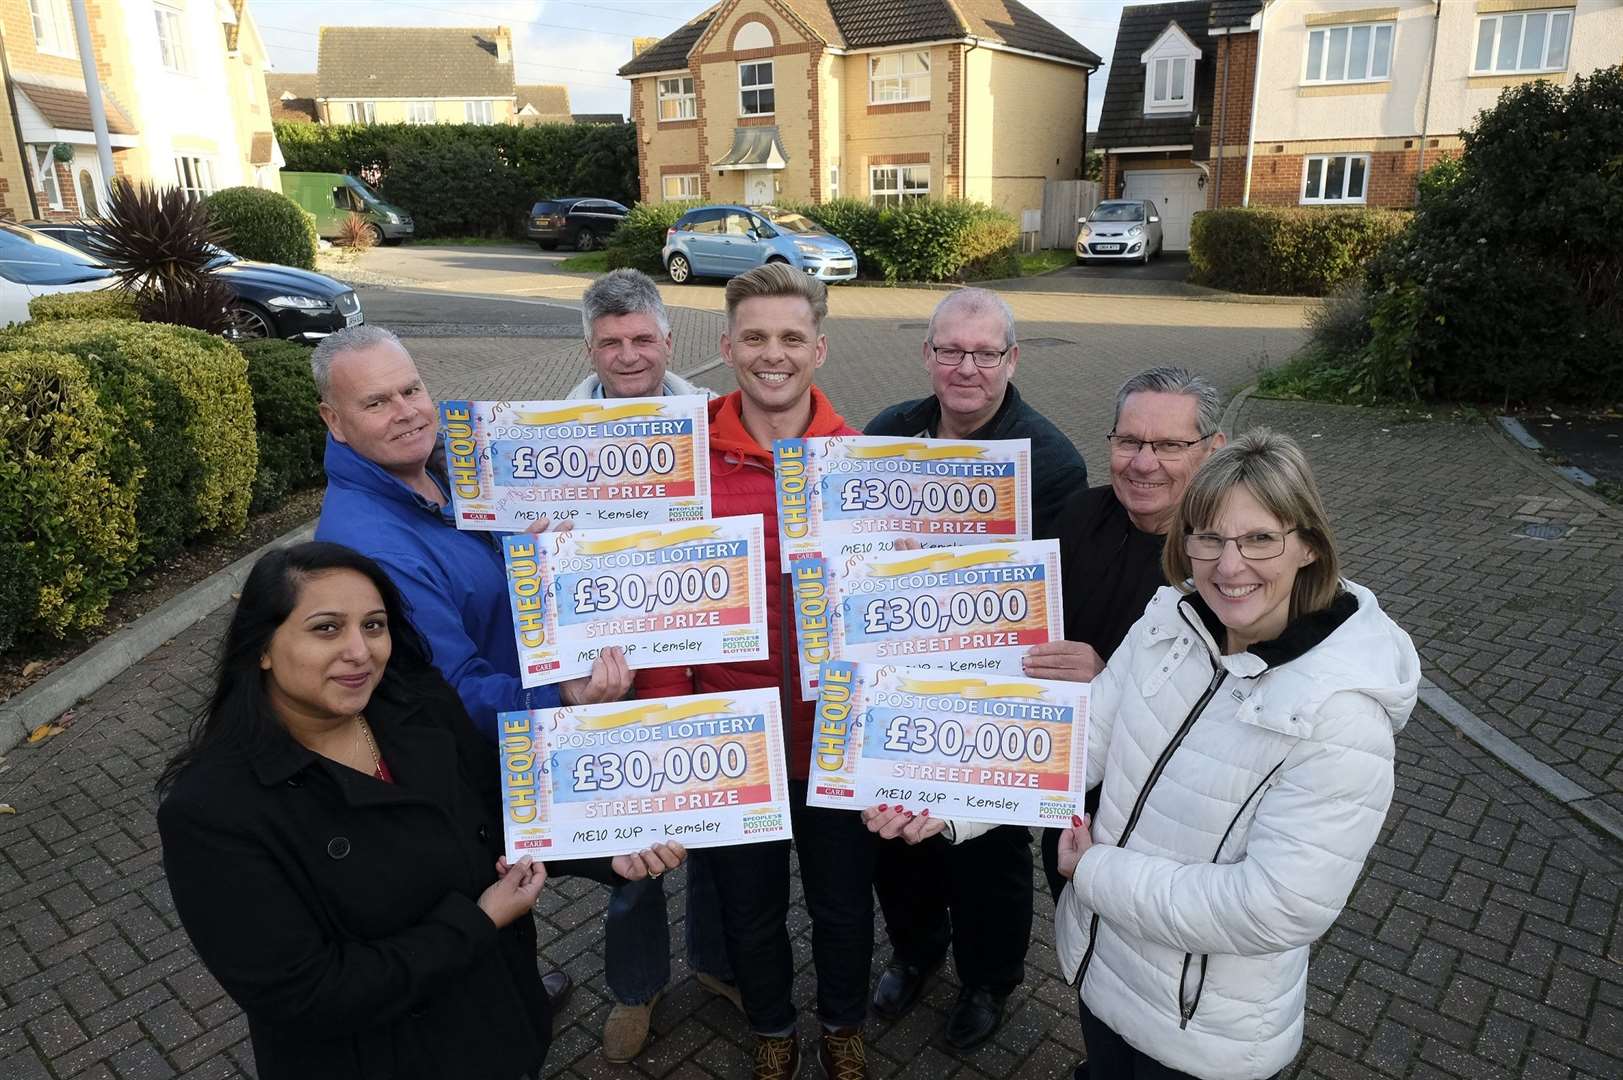 This group of neighbours from Sittingbourne won the lottery back in 2019